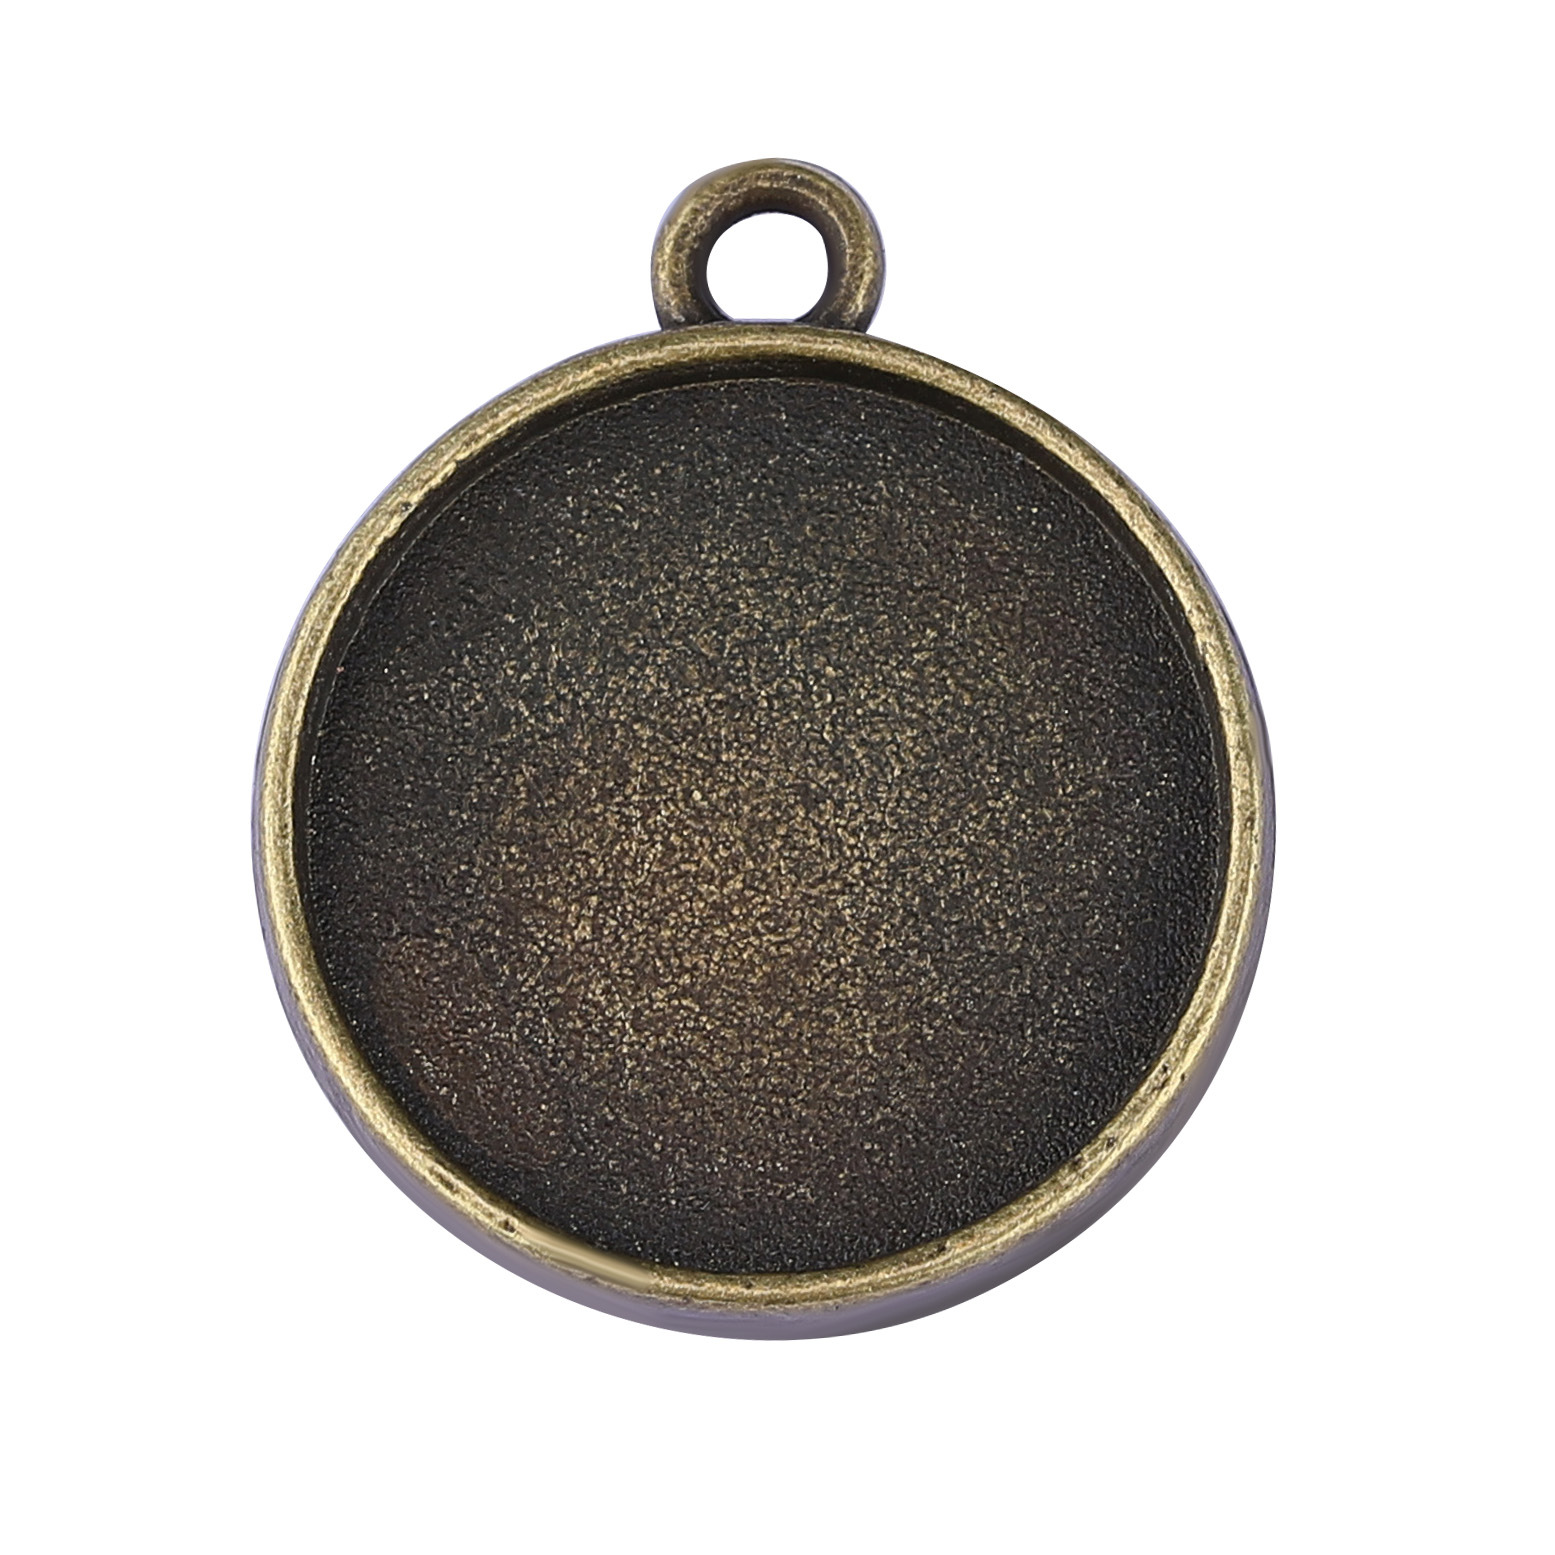 2:antique brass color plated